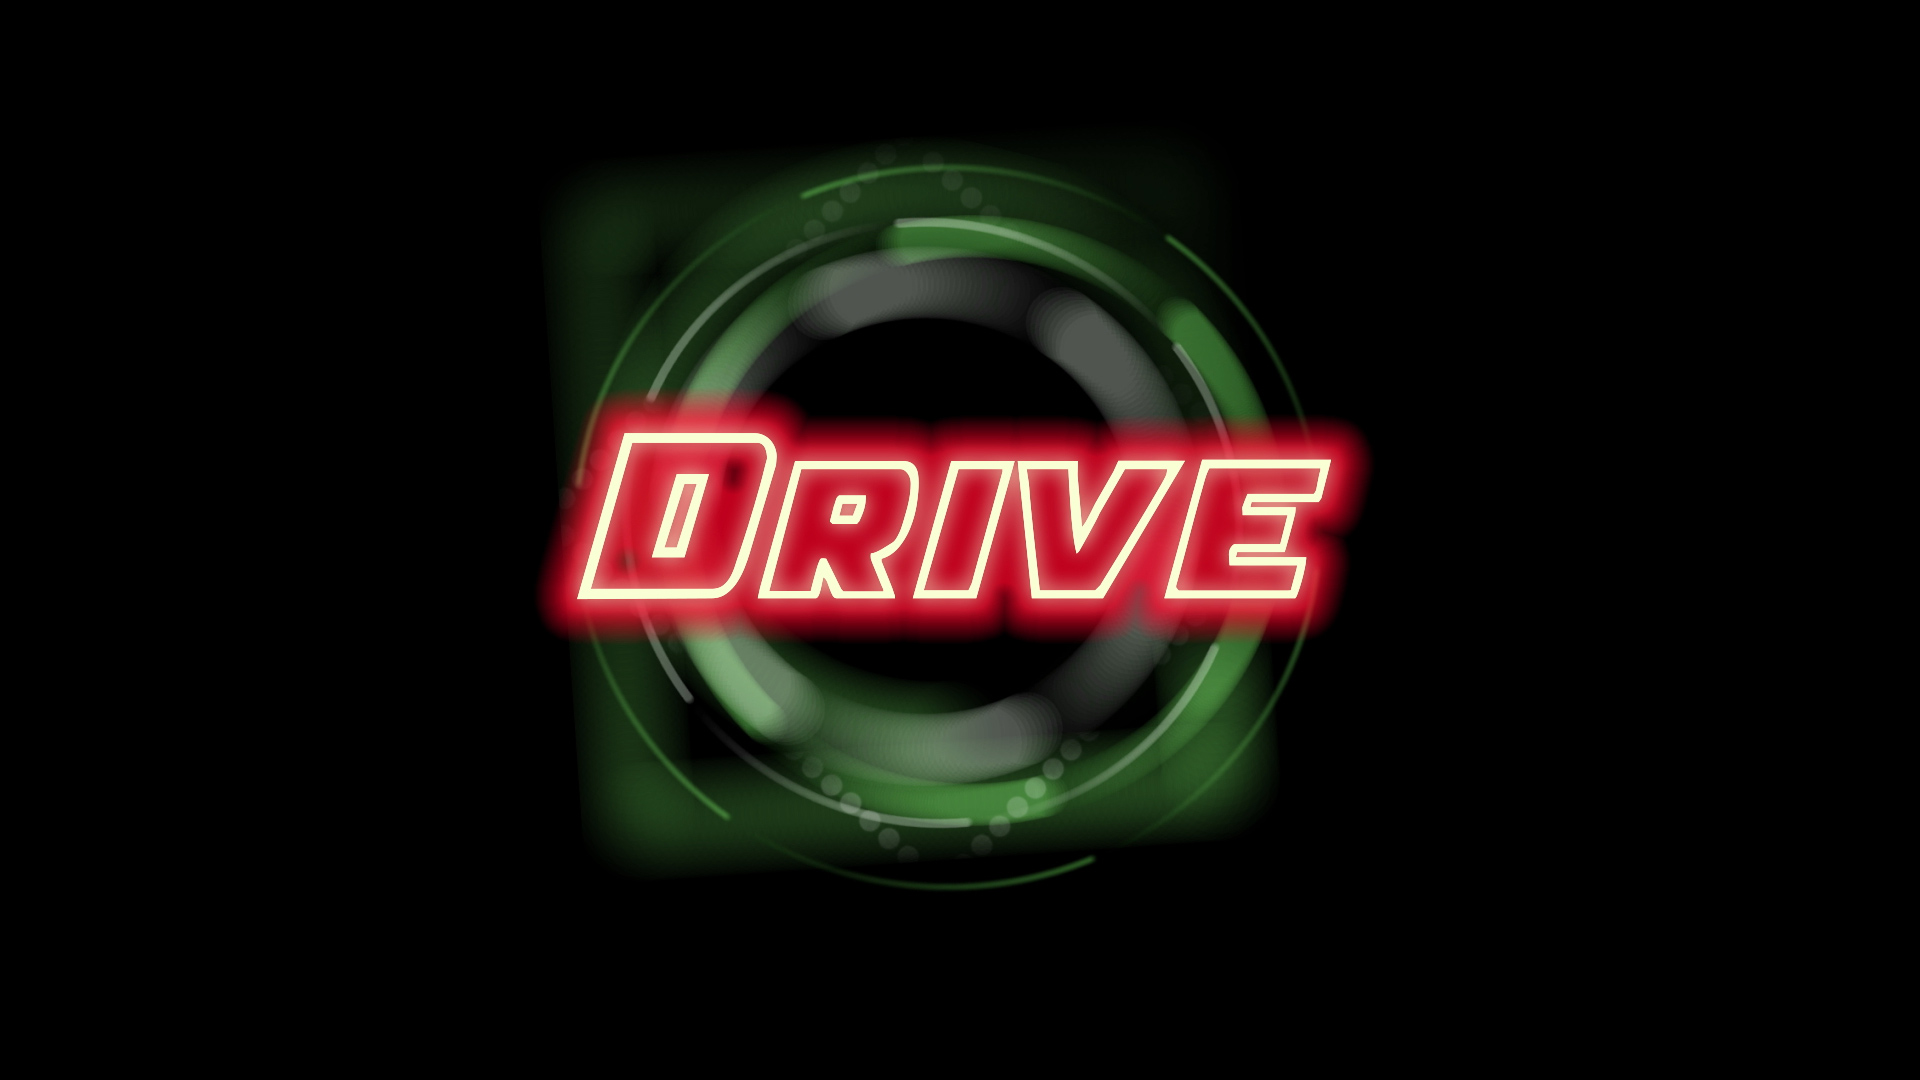 The Hue – How Would You Define “Drive”?